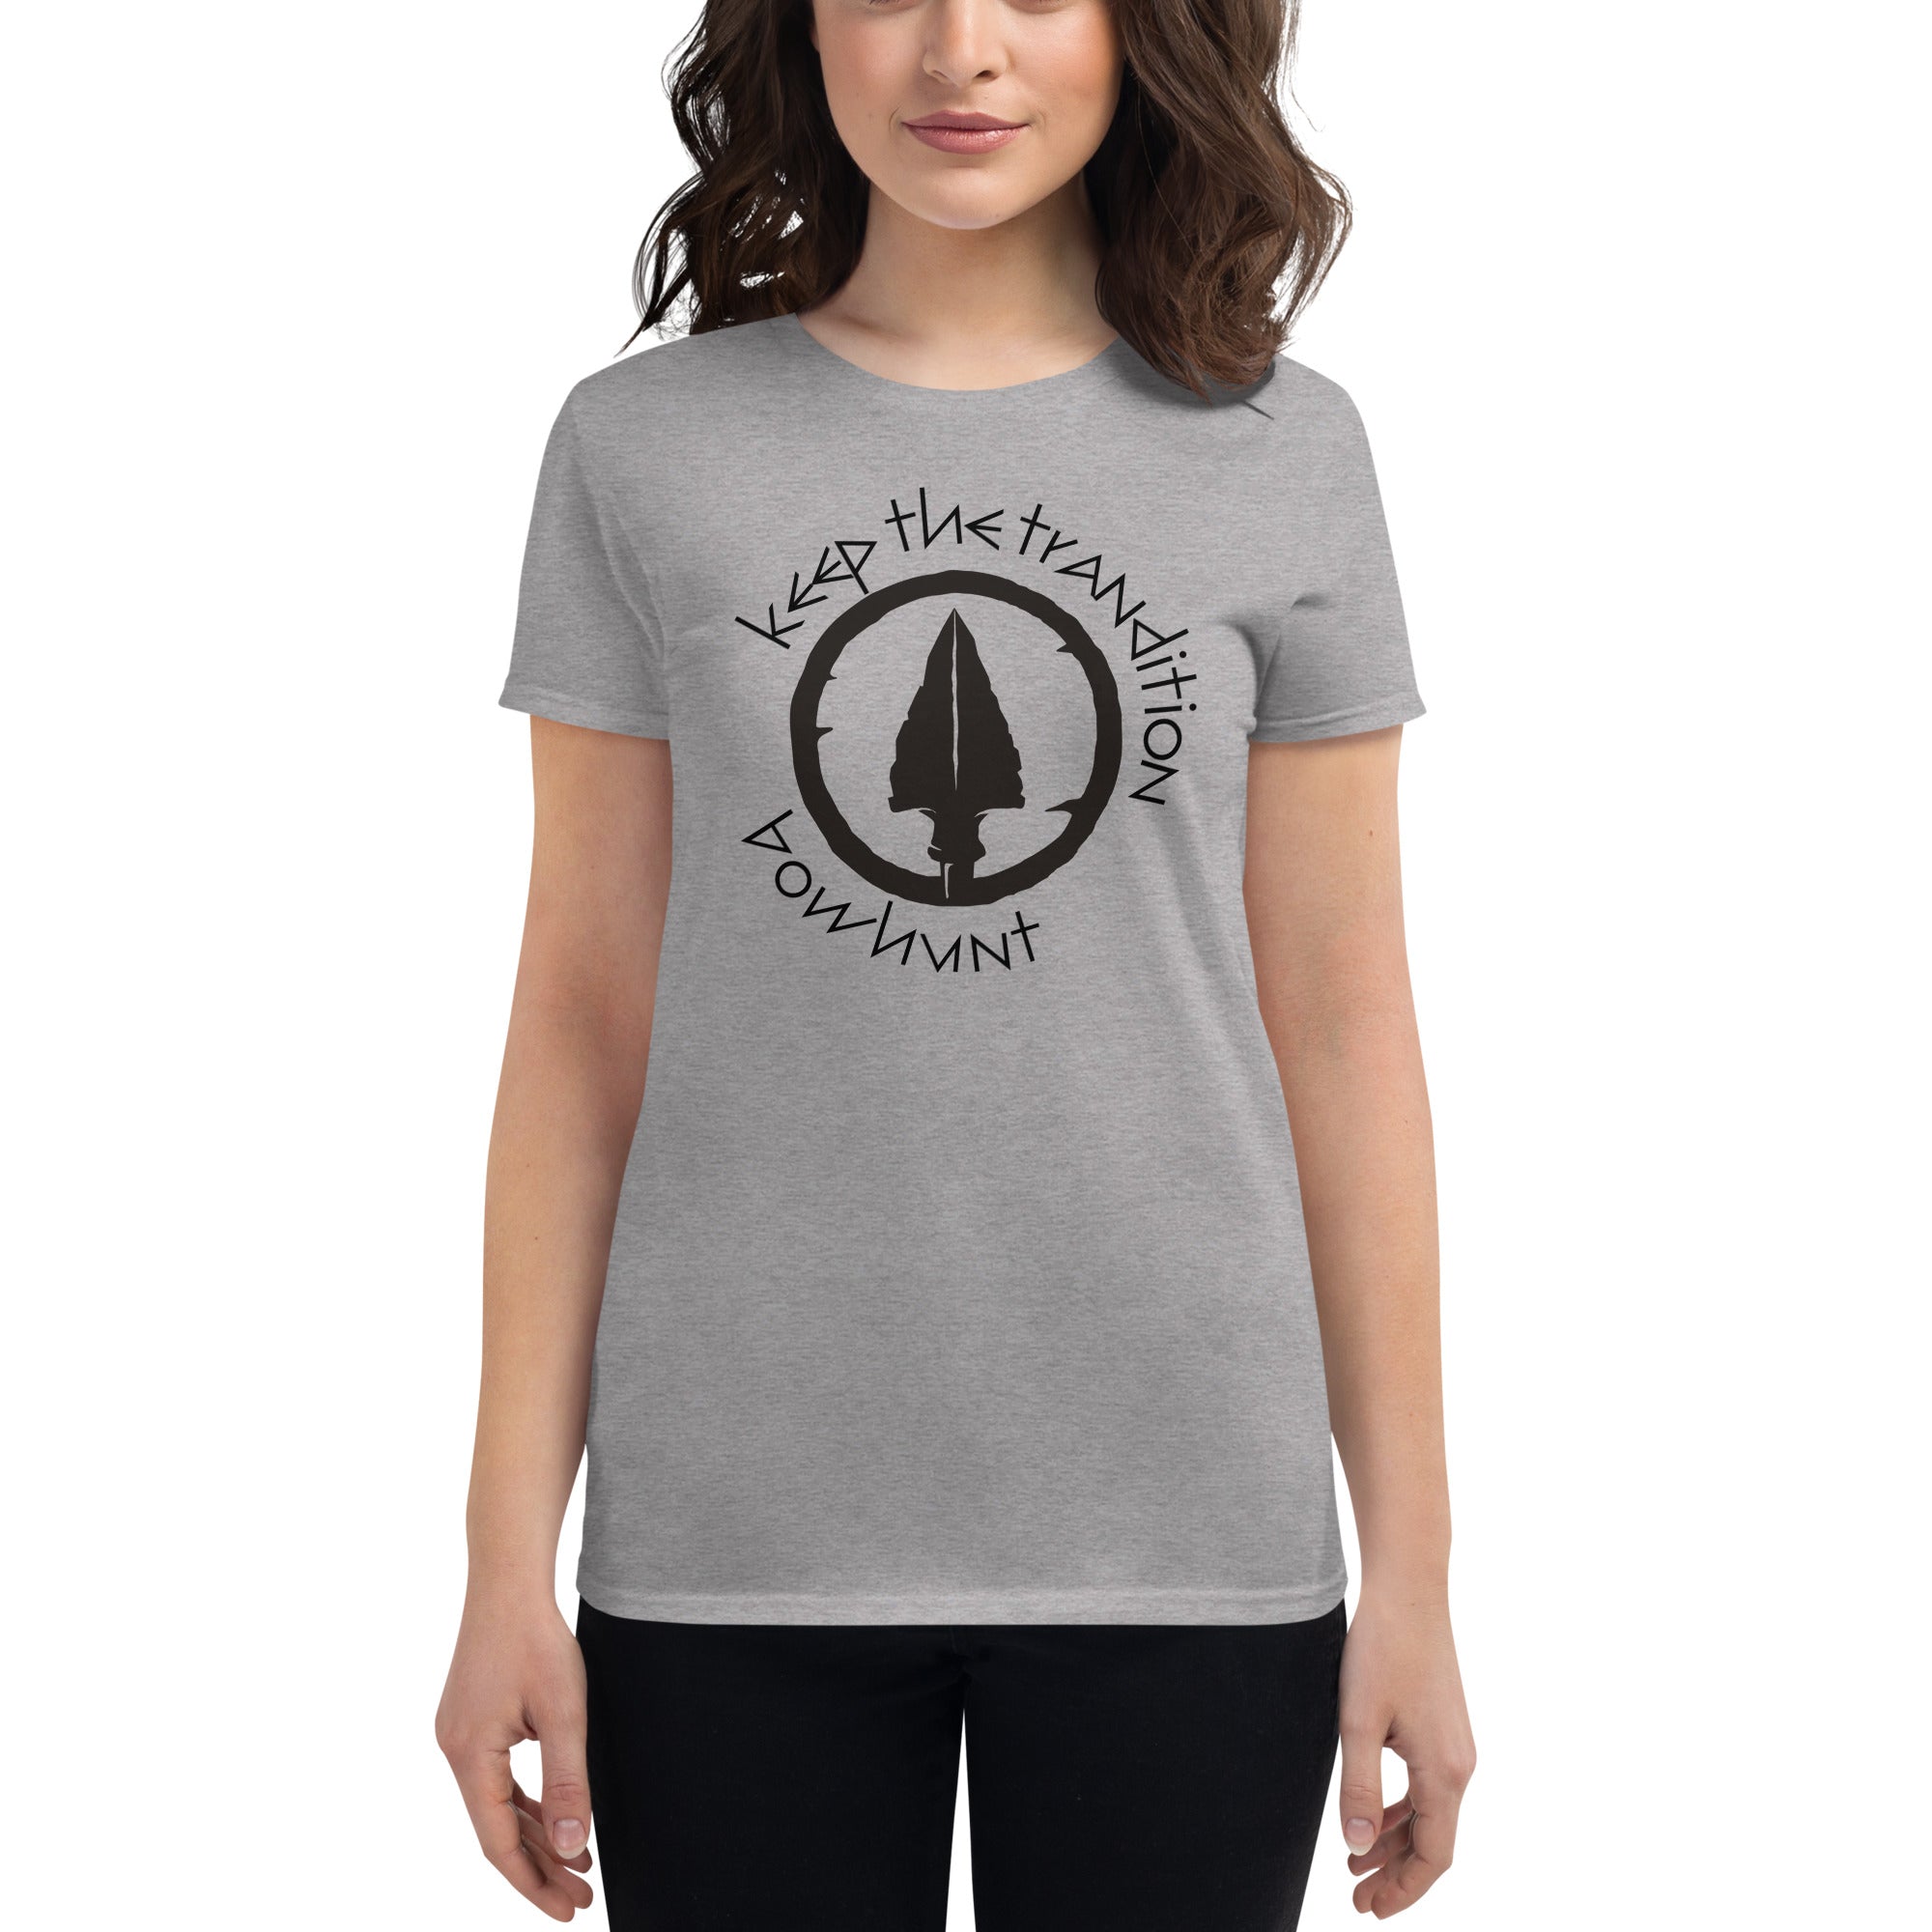 Keep The Tradition Women's Fitted T-Shirt - Bow Hunt